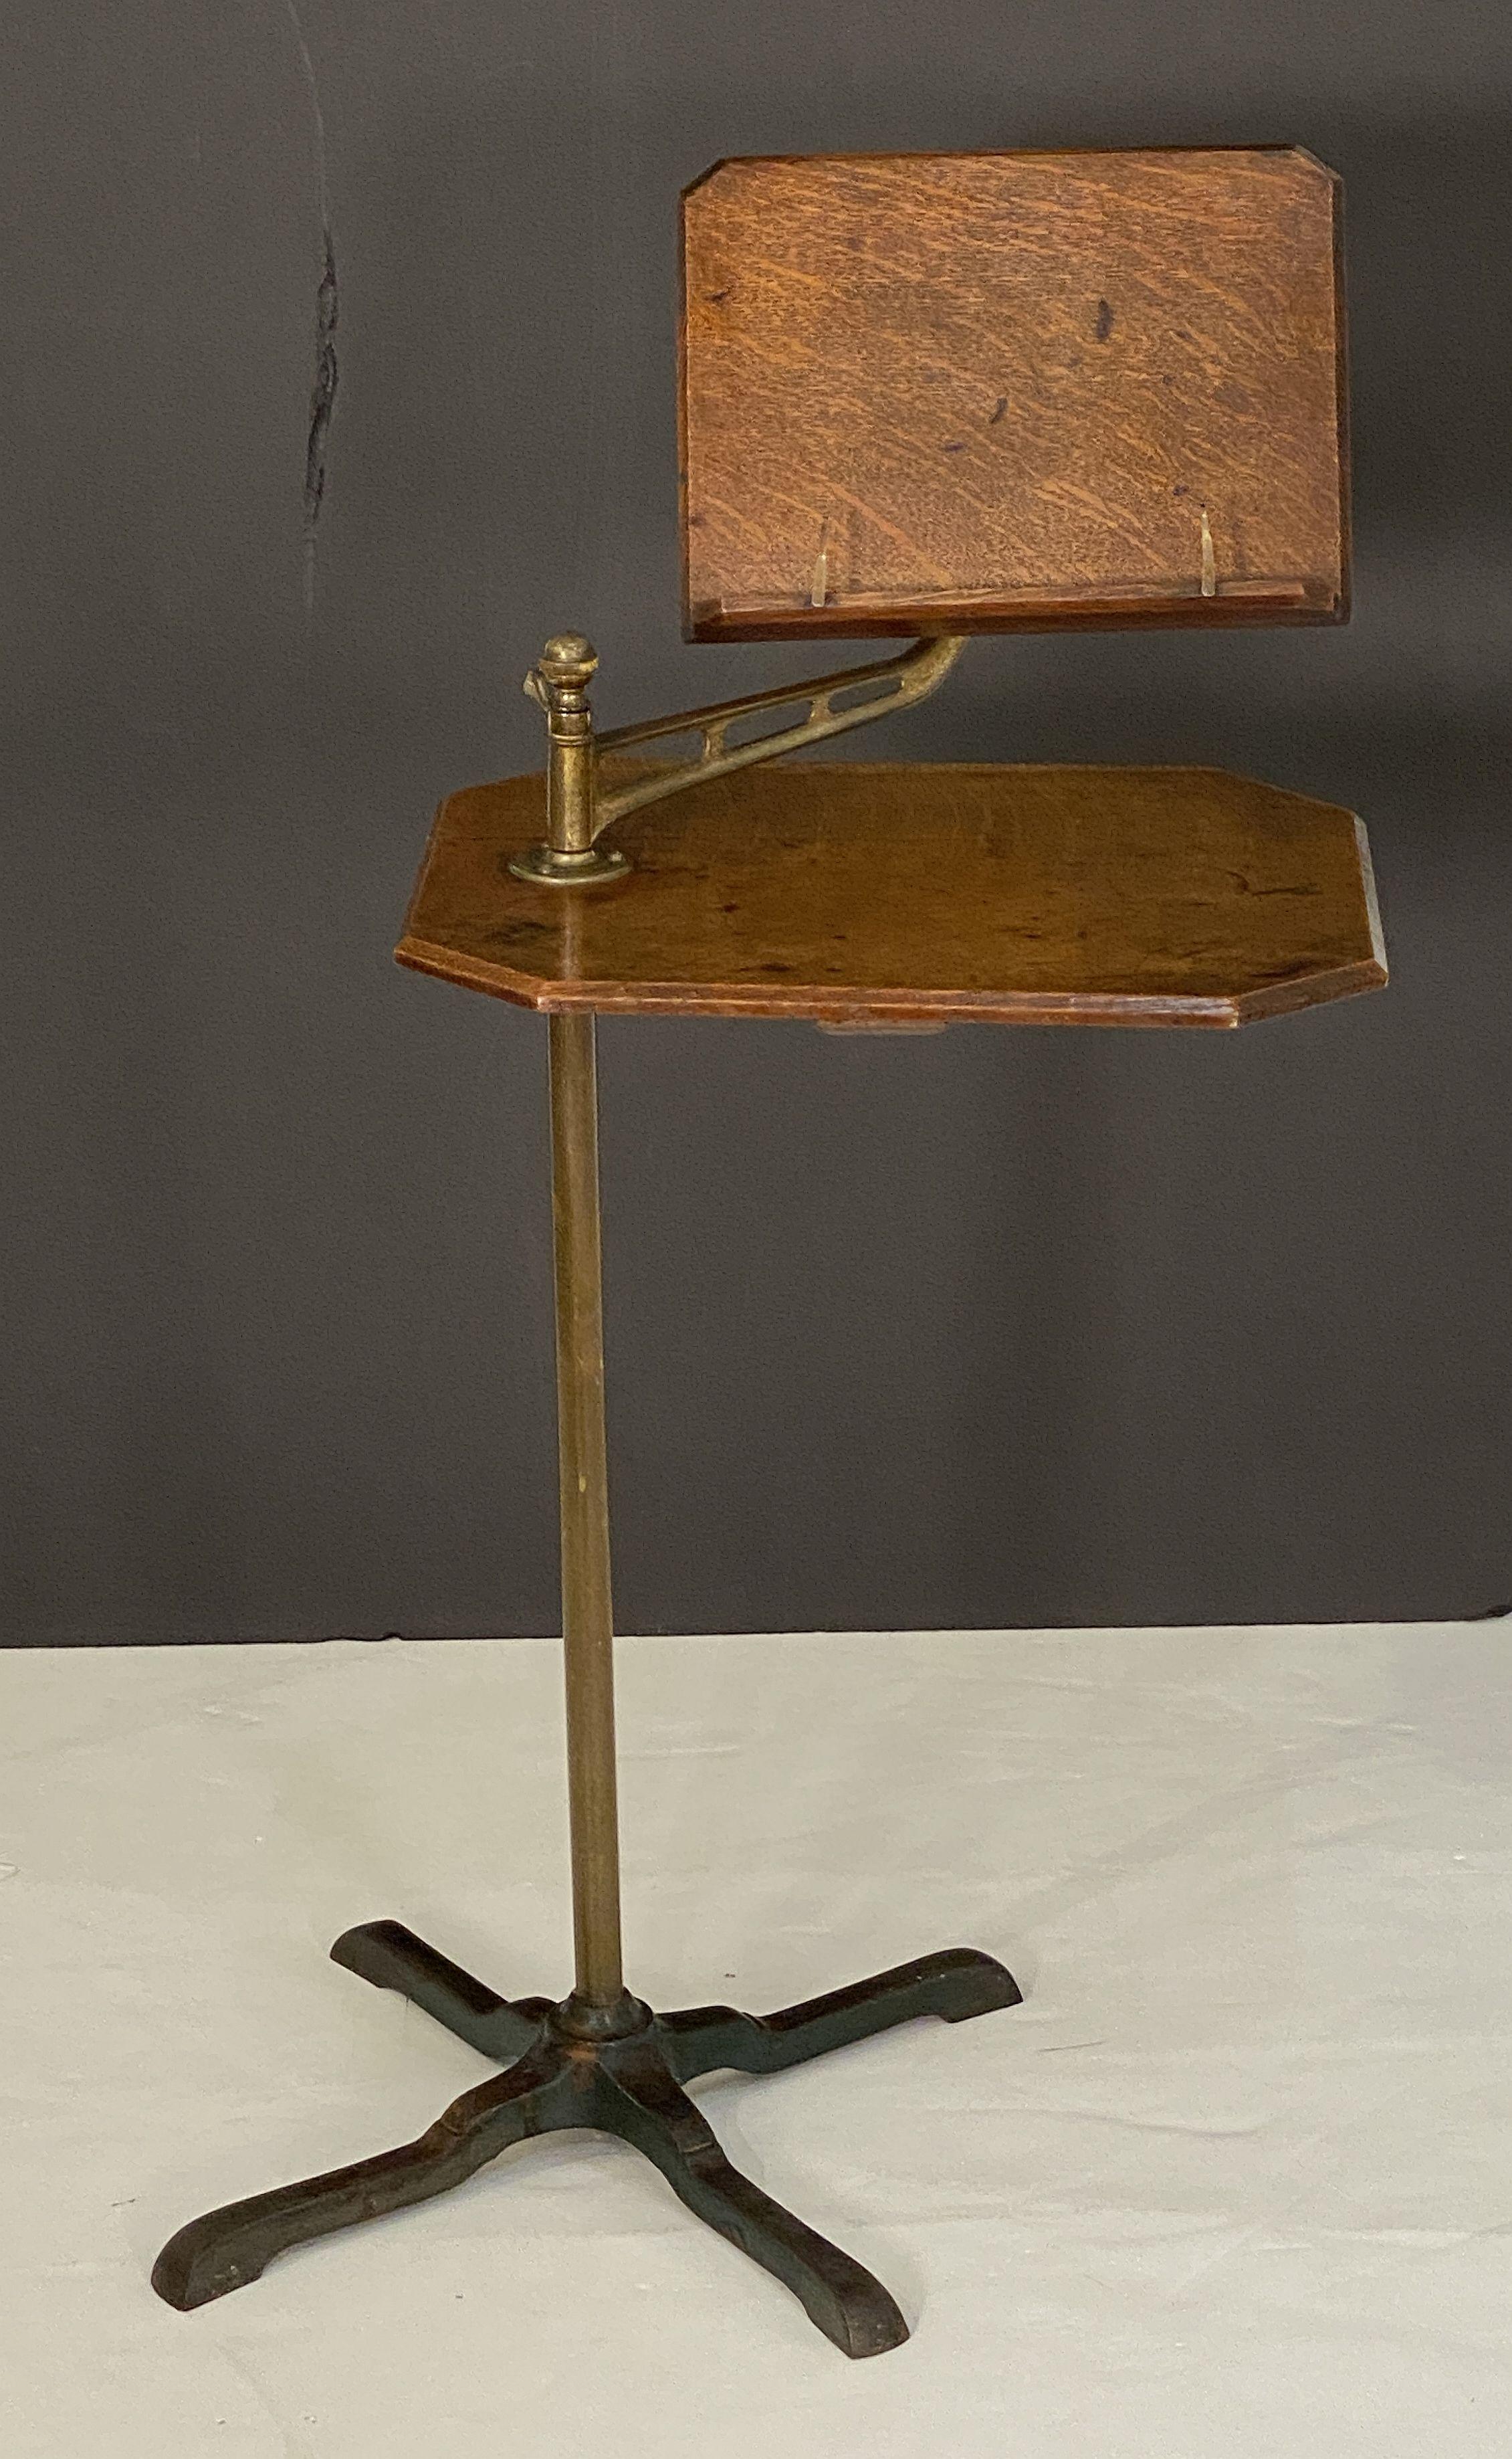 English Adjustable Floor-Standing Book Lectern or Reading Stand 2